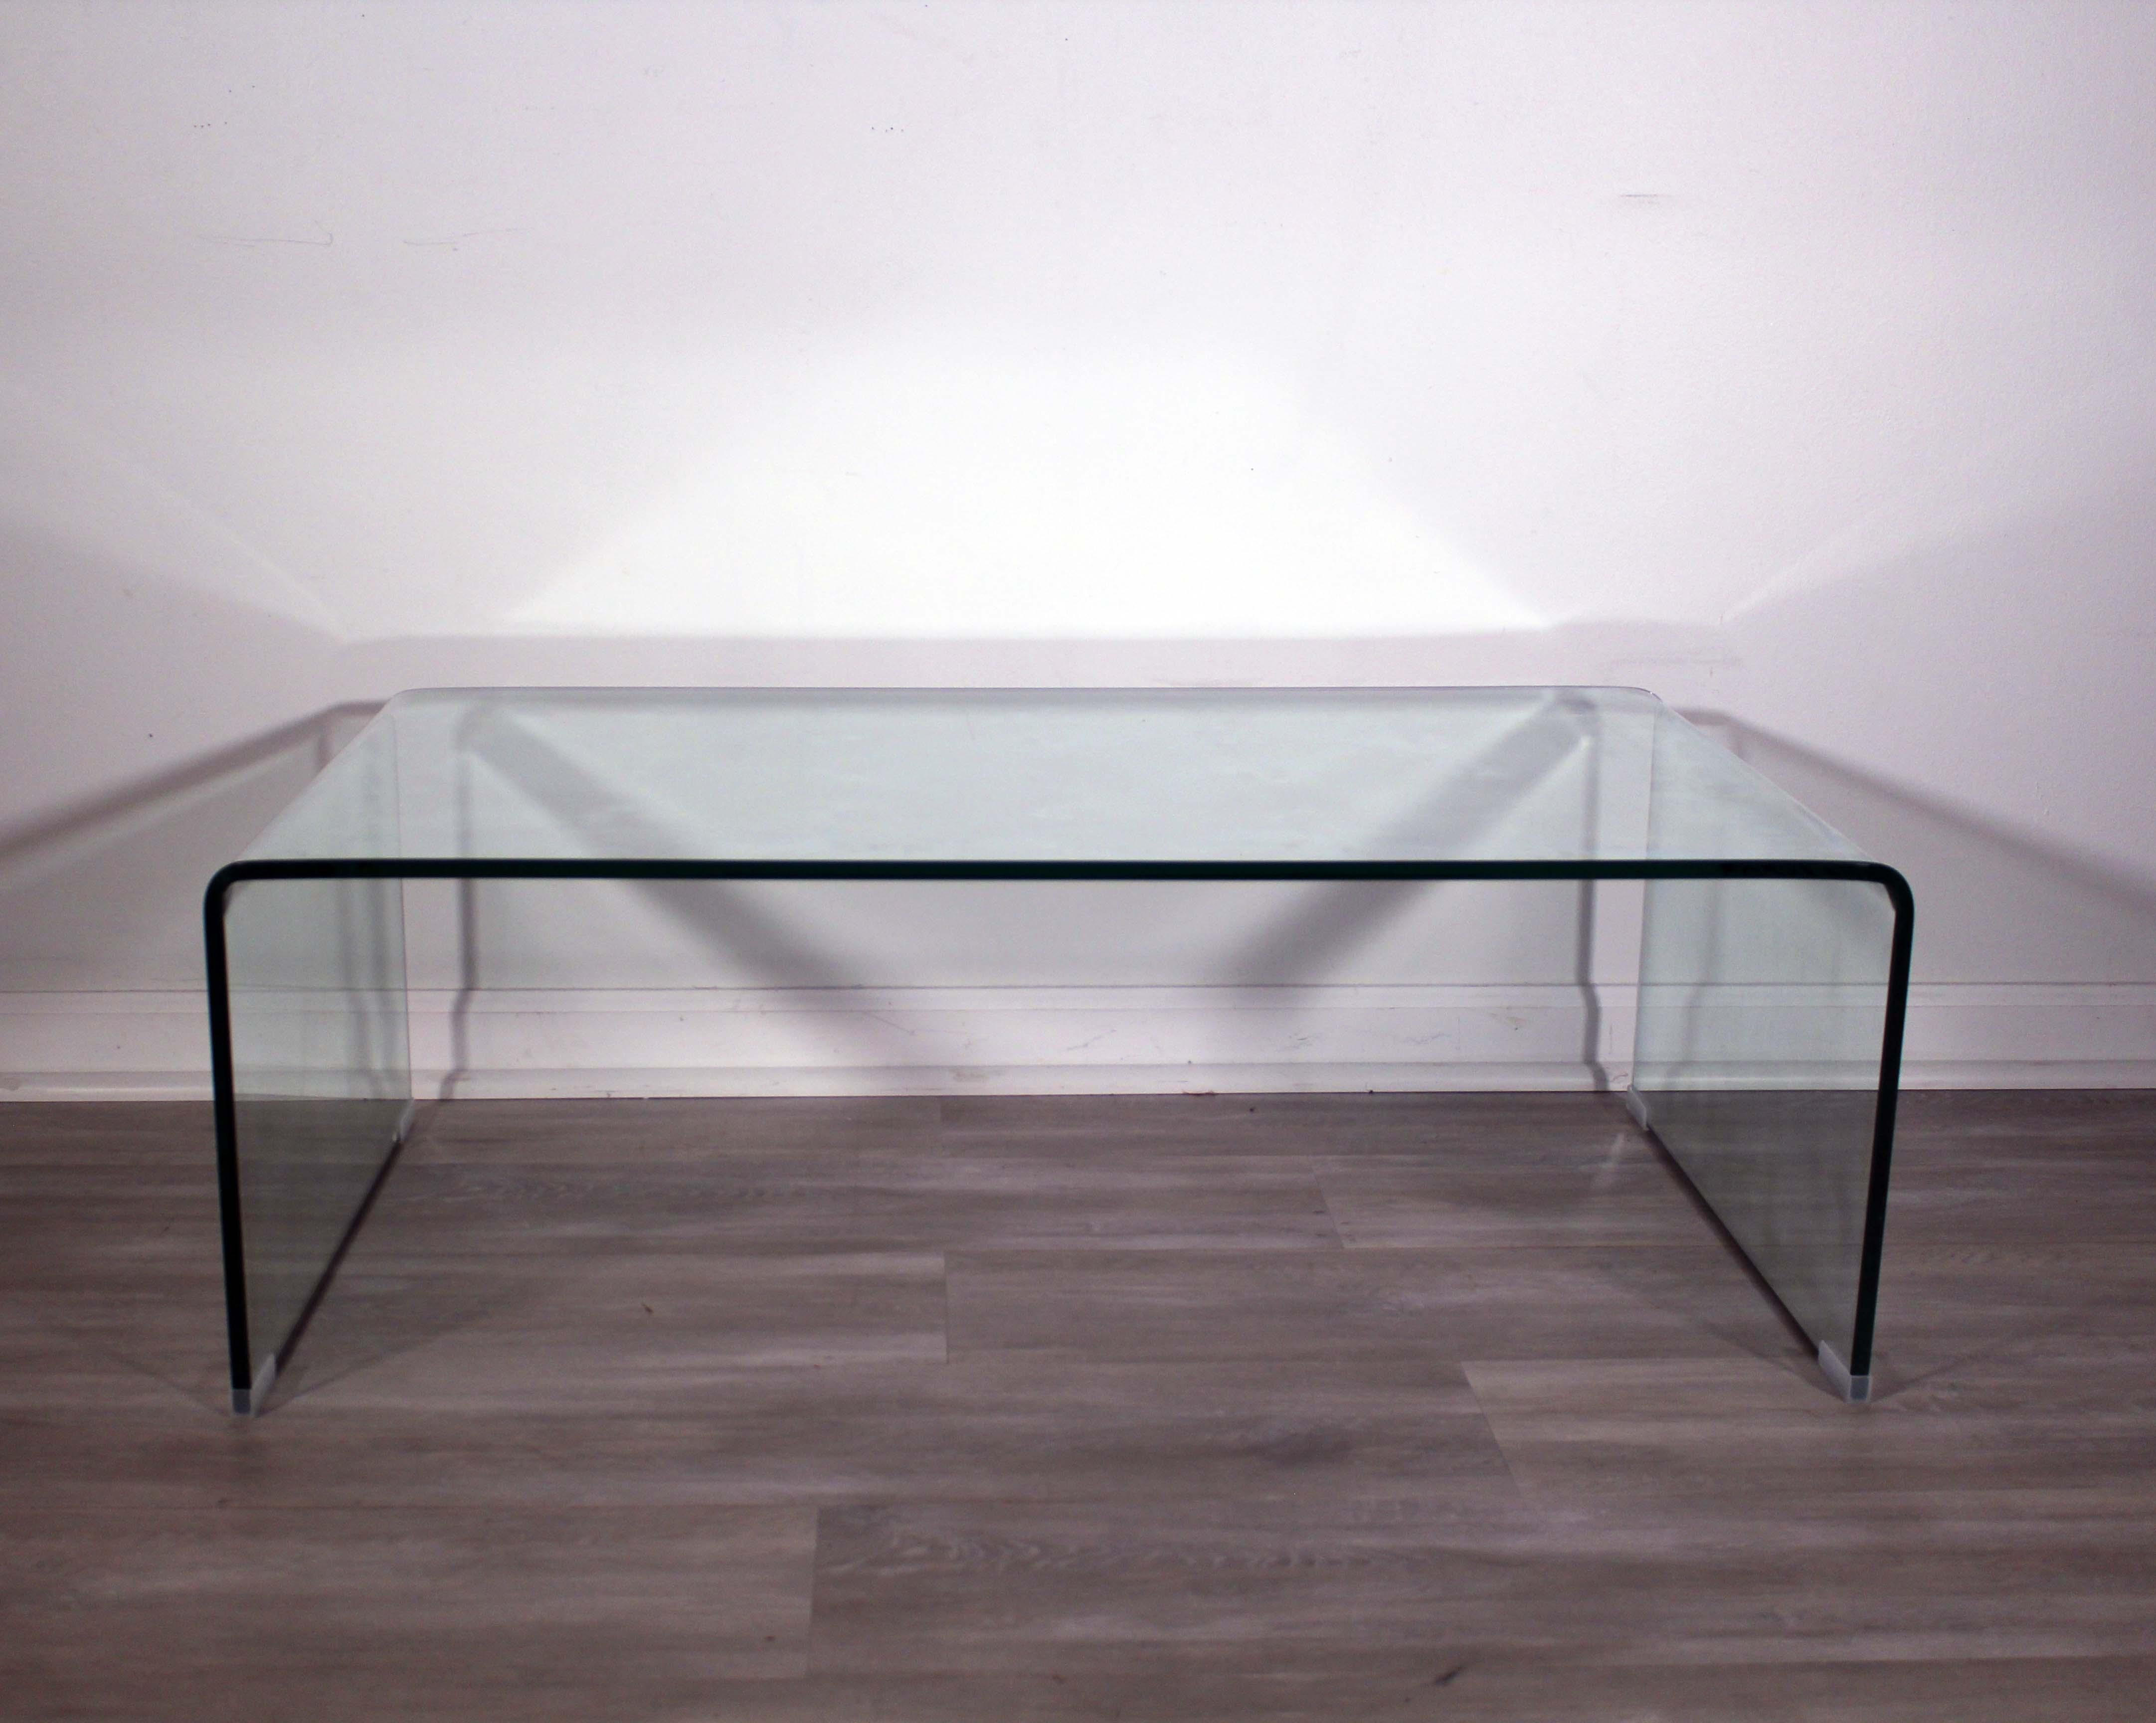 This exquisite glass waterfall coffee table will be the perfect centerpiece for your living room. Crafted from clear glass, its sleek design makes it a modern and contemporary statement piece. The table has a unique waterfall effect, with a curved